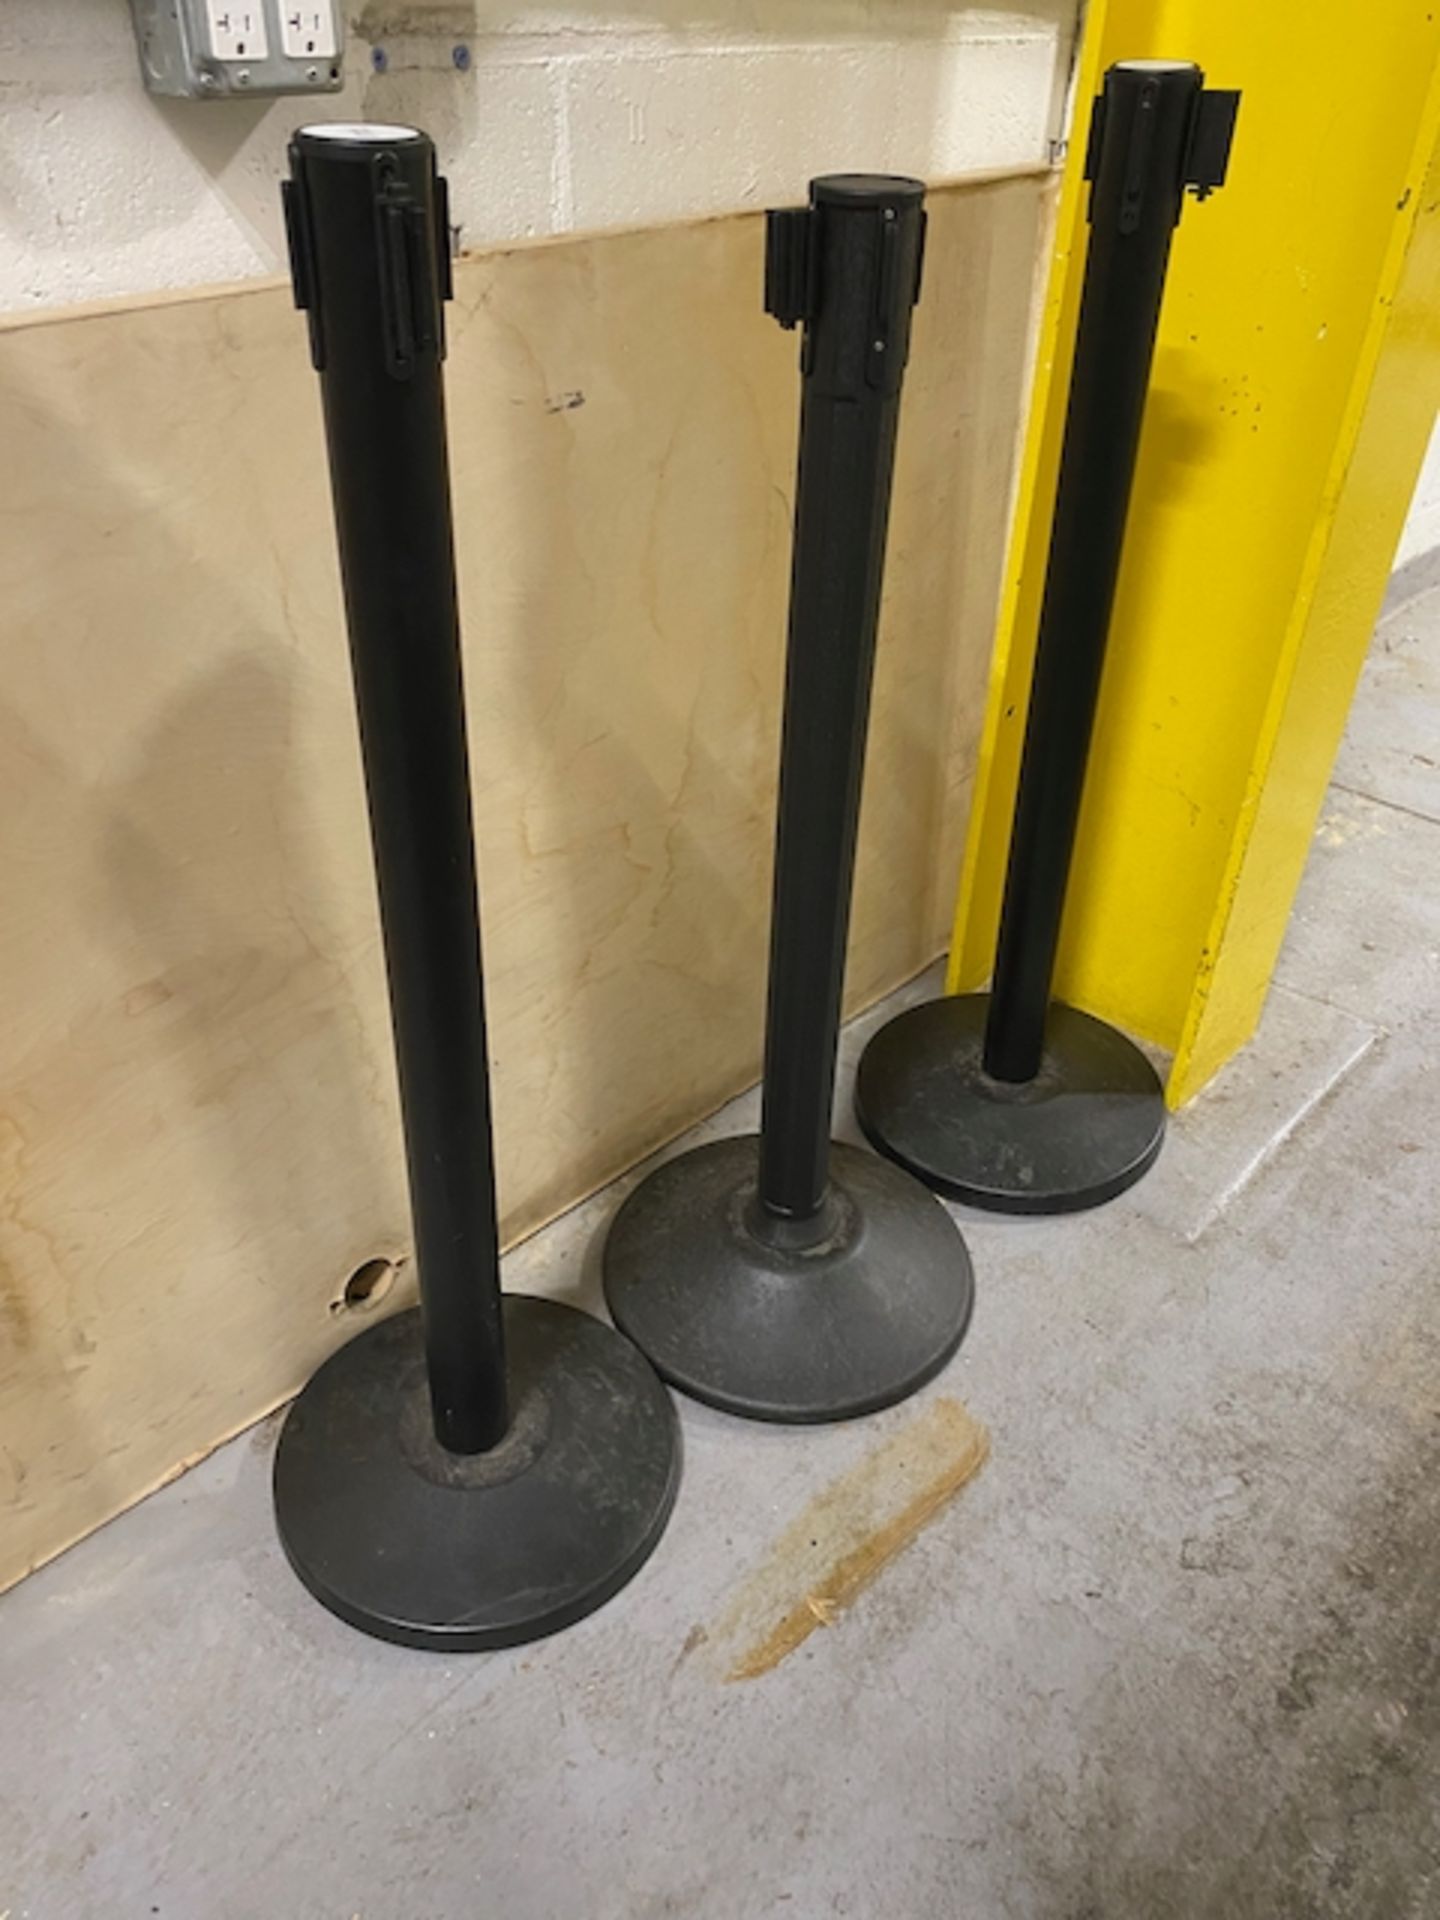 (3) Stanchions With Retractable Belts | Rig Fee $20